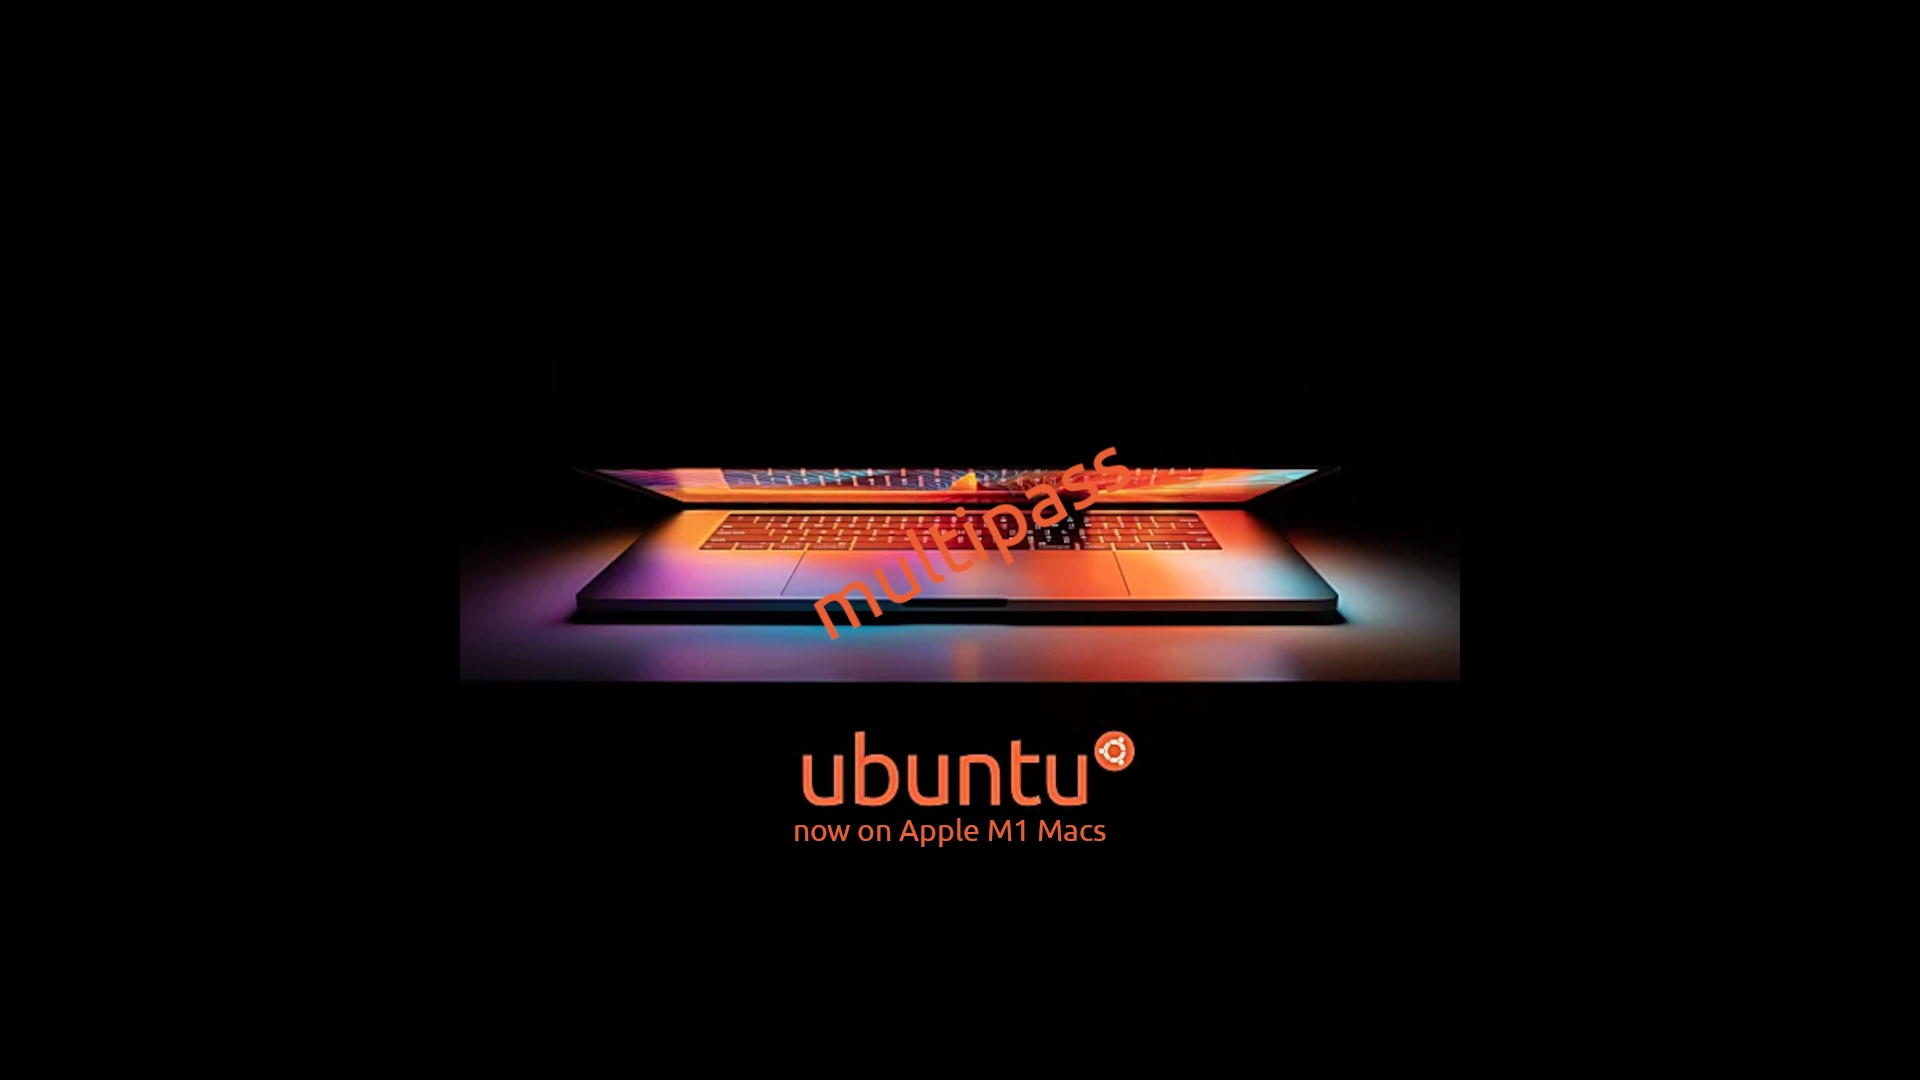 Canonical Makes It Easier to Run Ubuntu VMs on Apple M1 Macs with Multipass